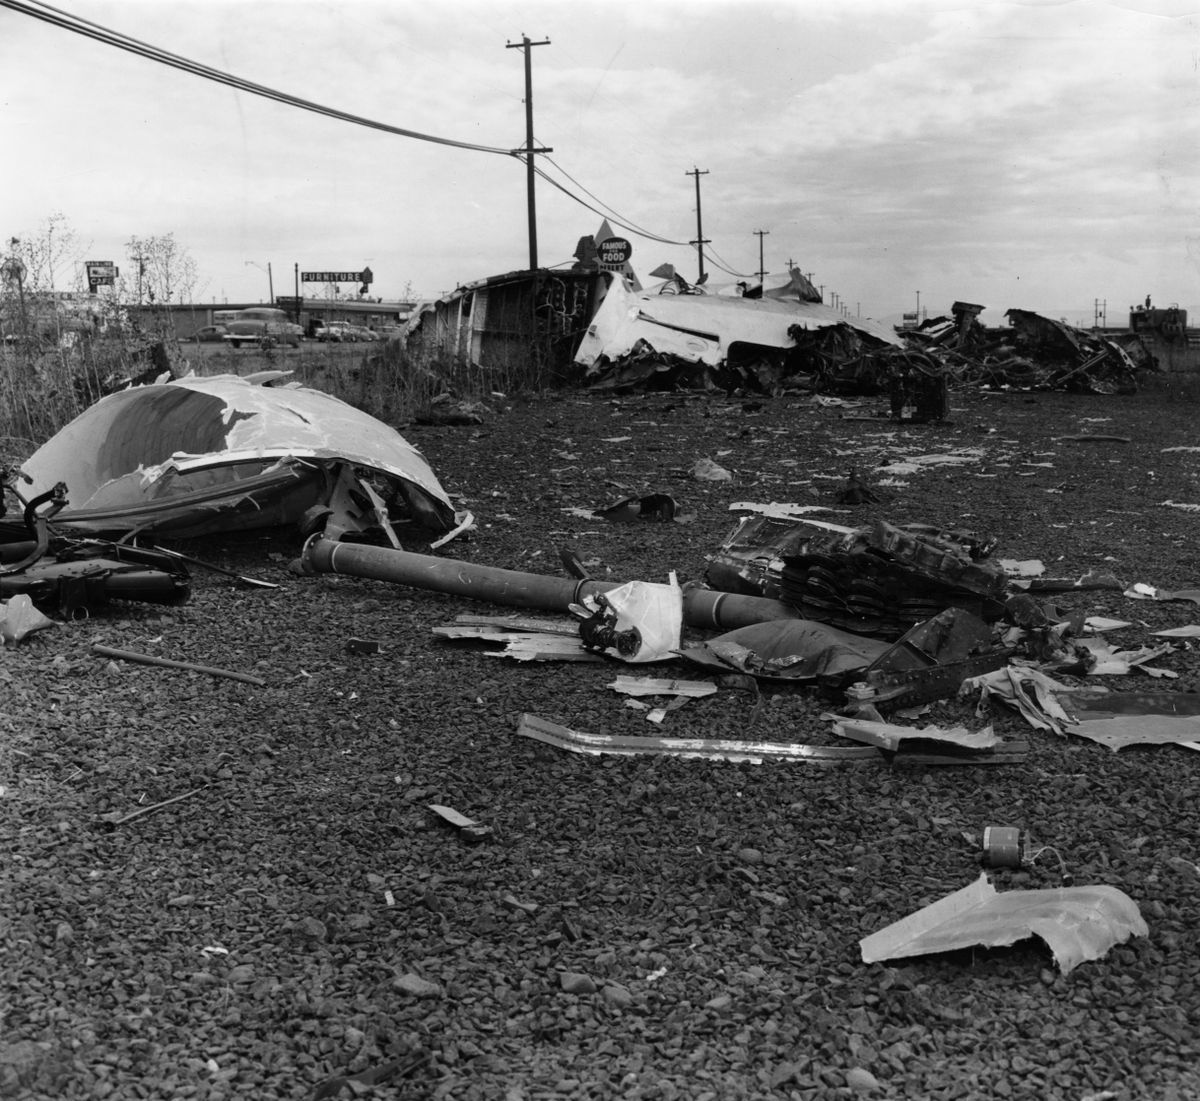 B-52 wreckage is strewn across a field after a collision near  Fairchild Air Force Base on Sept. 9, 1958. (File / The Spokesman-Review)